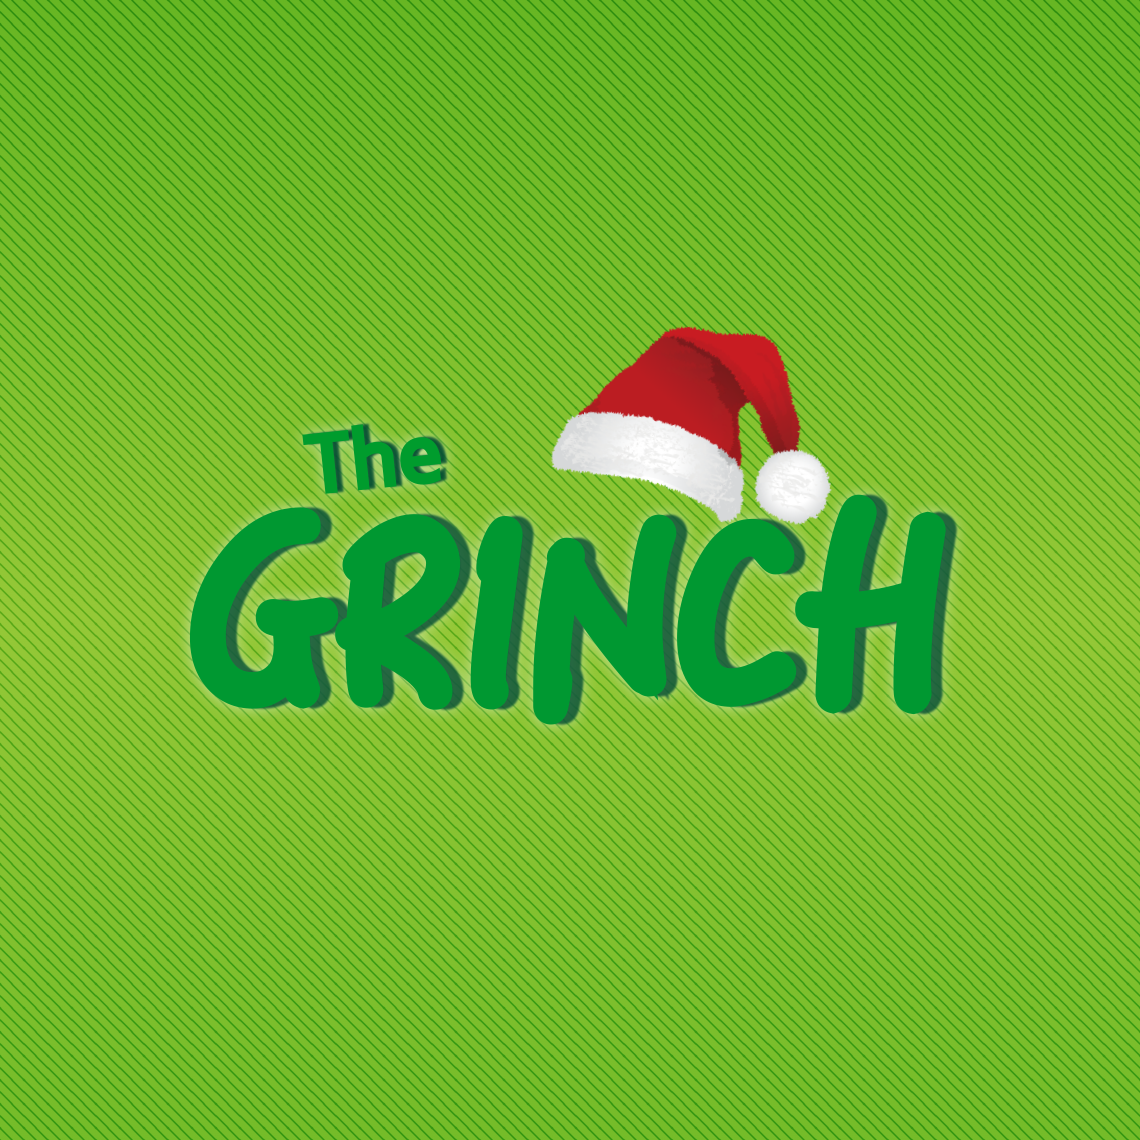 How The Grinch Stole Christmas full movie - Your ONLINE options!